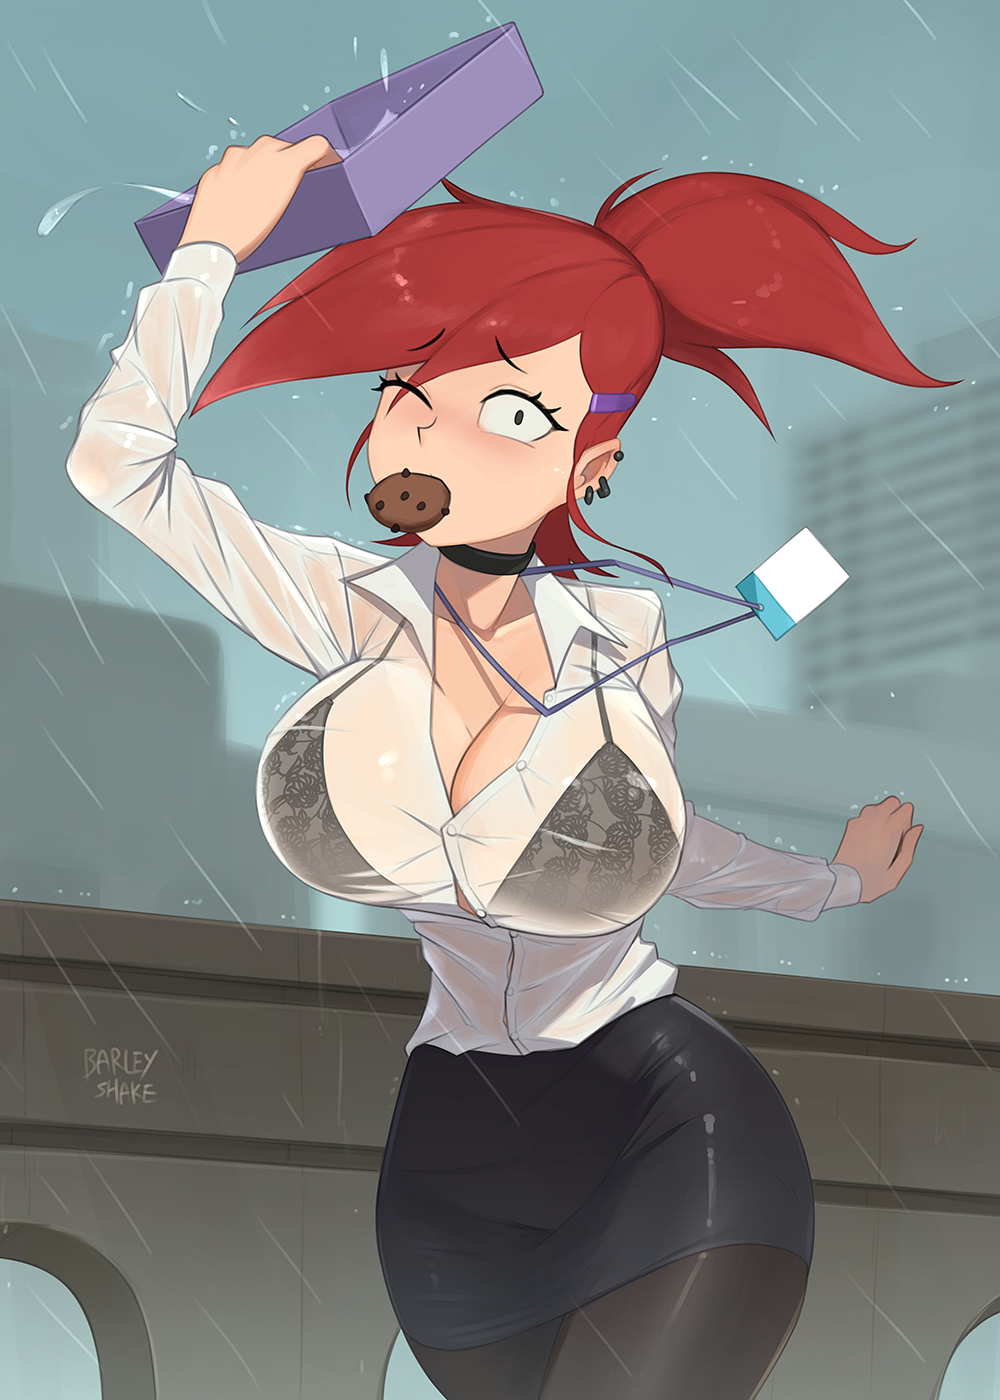 1girl barleyshake big_breasts bra cartoon_network clothing cookie foster's_home_for_imaginary_friends frankie_foster one_eye_closed ponytail raining red_hair solo_female wet_clothewets wet_shirt